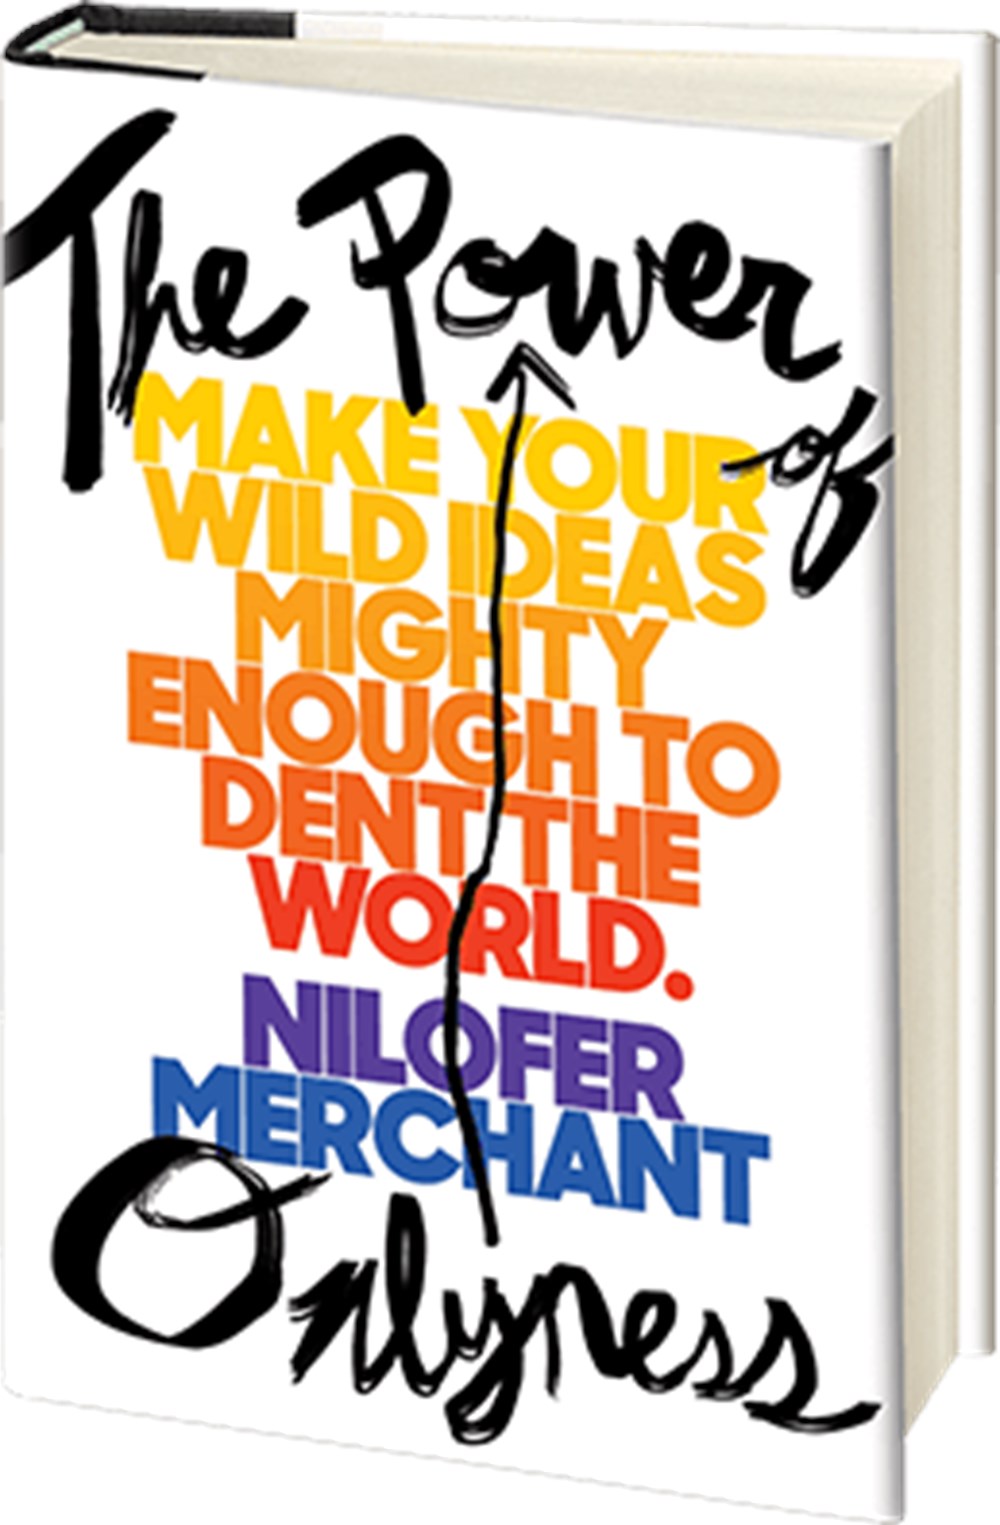 Power of Onlyness: Make Your Wild Ideas Mighty Enough to Dent the World